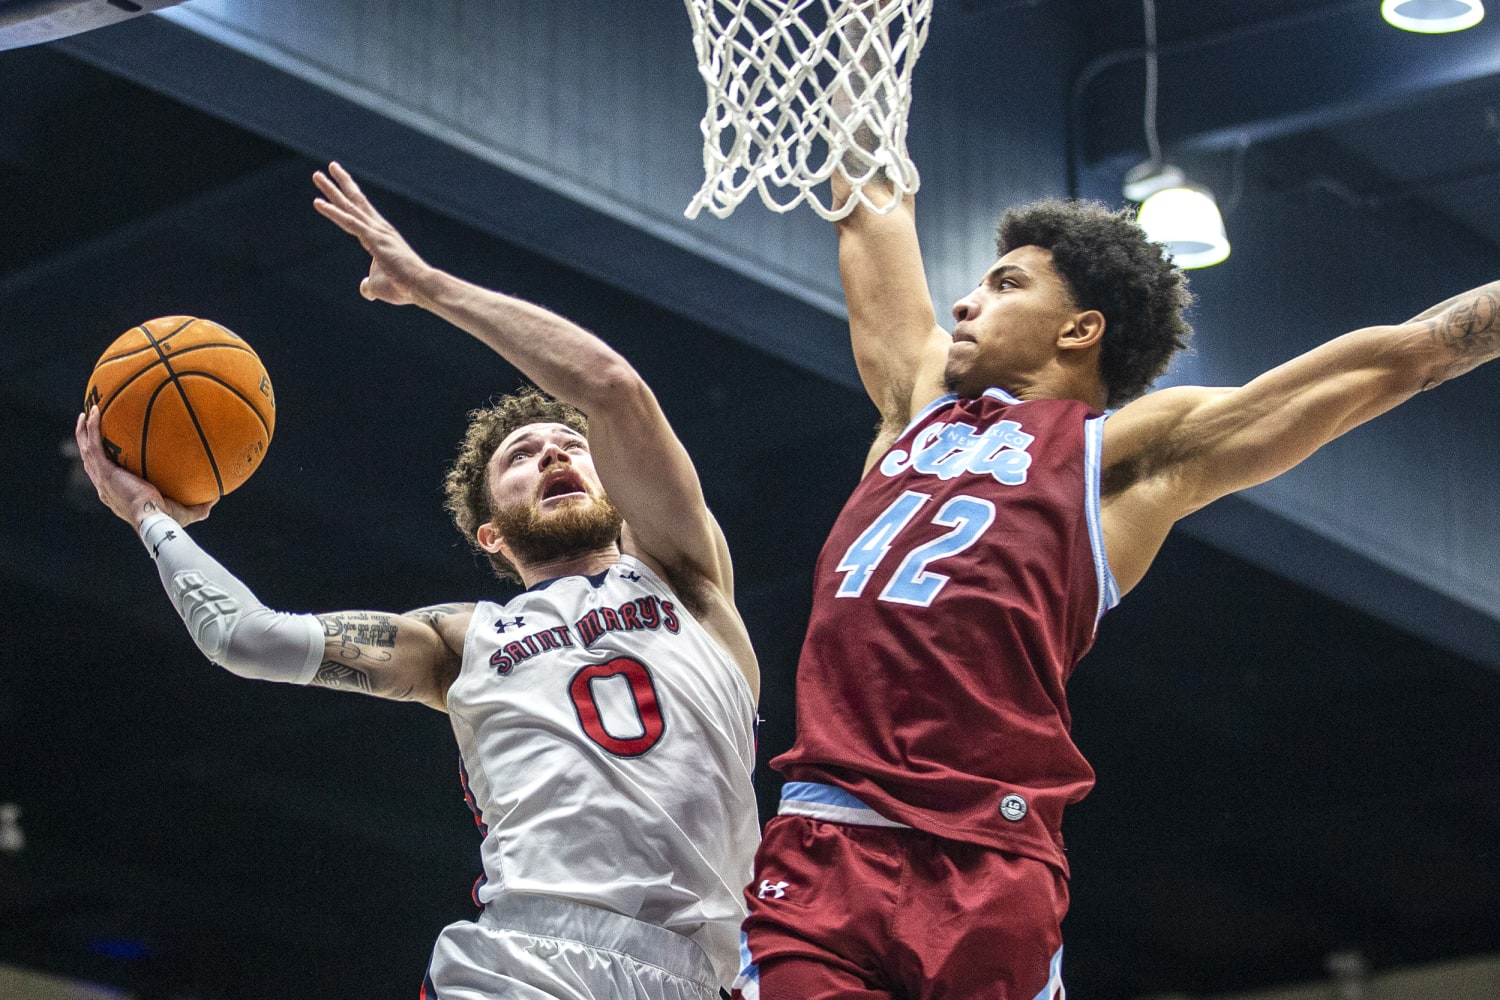 New Mexico State suspends operations of men’s basketball team